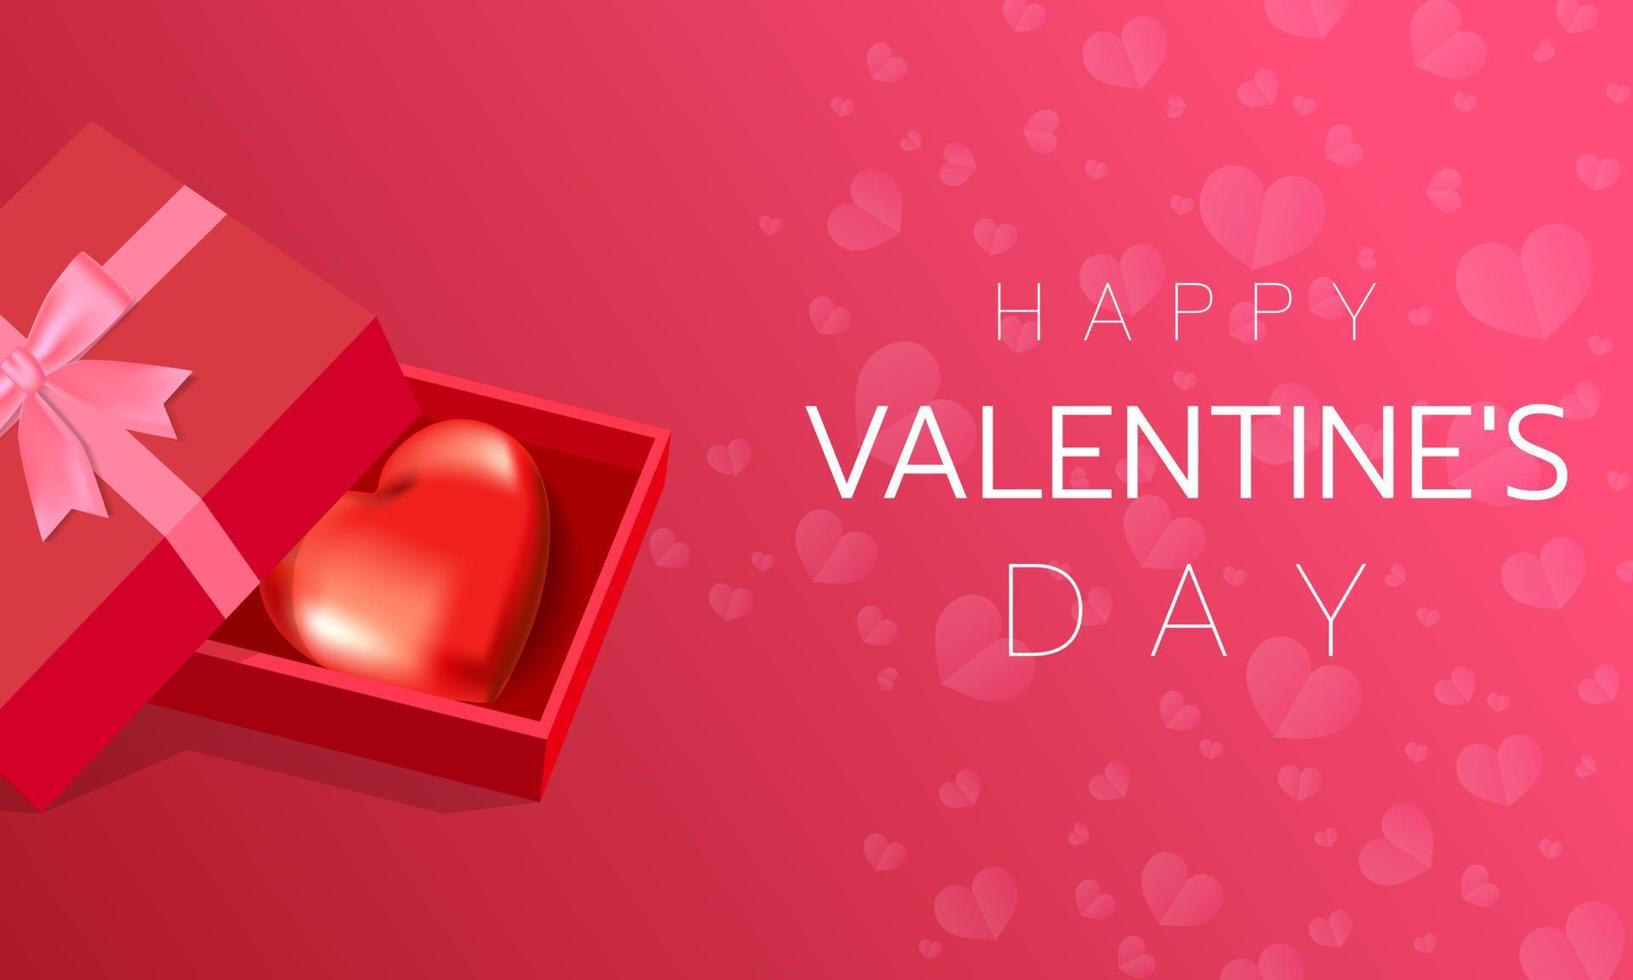 Red hearts are in a red gift box tied with a pink ribbon. on a pink background with reddish pink hearts and many small hearts vector